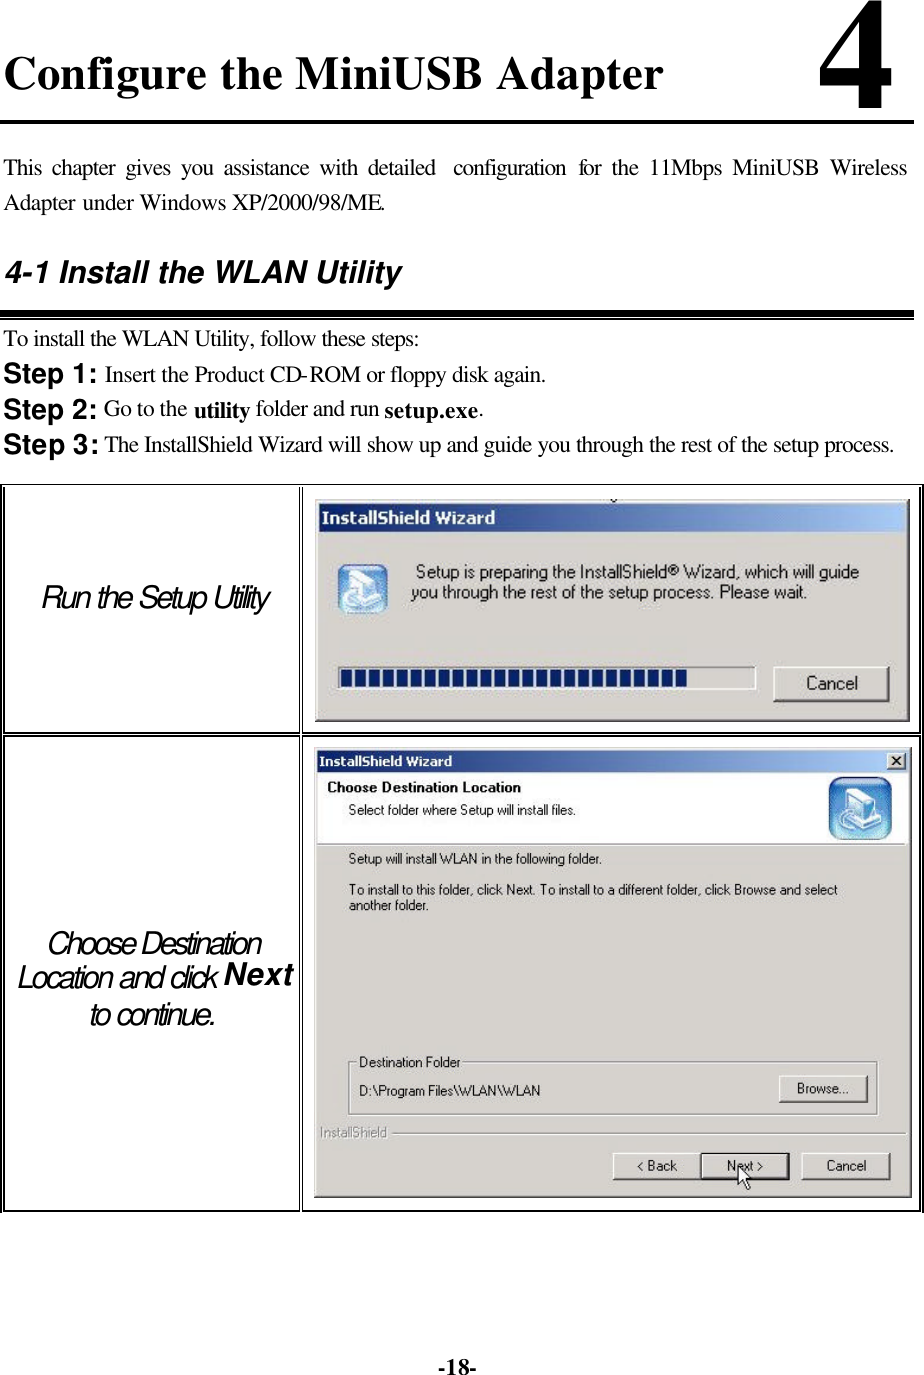   -18-Configure the MiniUSB Adapter       4 This chapter gives you assistance with detailed  configuration  for the 11Mbps MiniUSB Wireless Adapter under Windows XP/2000/98/ME. 4-1 Install the WLAN Utility To install the WLAN Utility, follow these steps: Step 1: Insert the Product CD-ROM or floppy disk again. Step 2: Go to the utility folder and run setup.exe. Step 3: The InstallShield Wizard will show up and guide you through the rest of the setup process. Run the Setup Utility  Choose Destination Location and click Next to continue.  